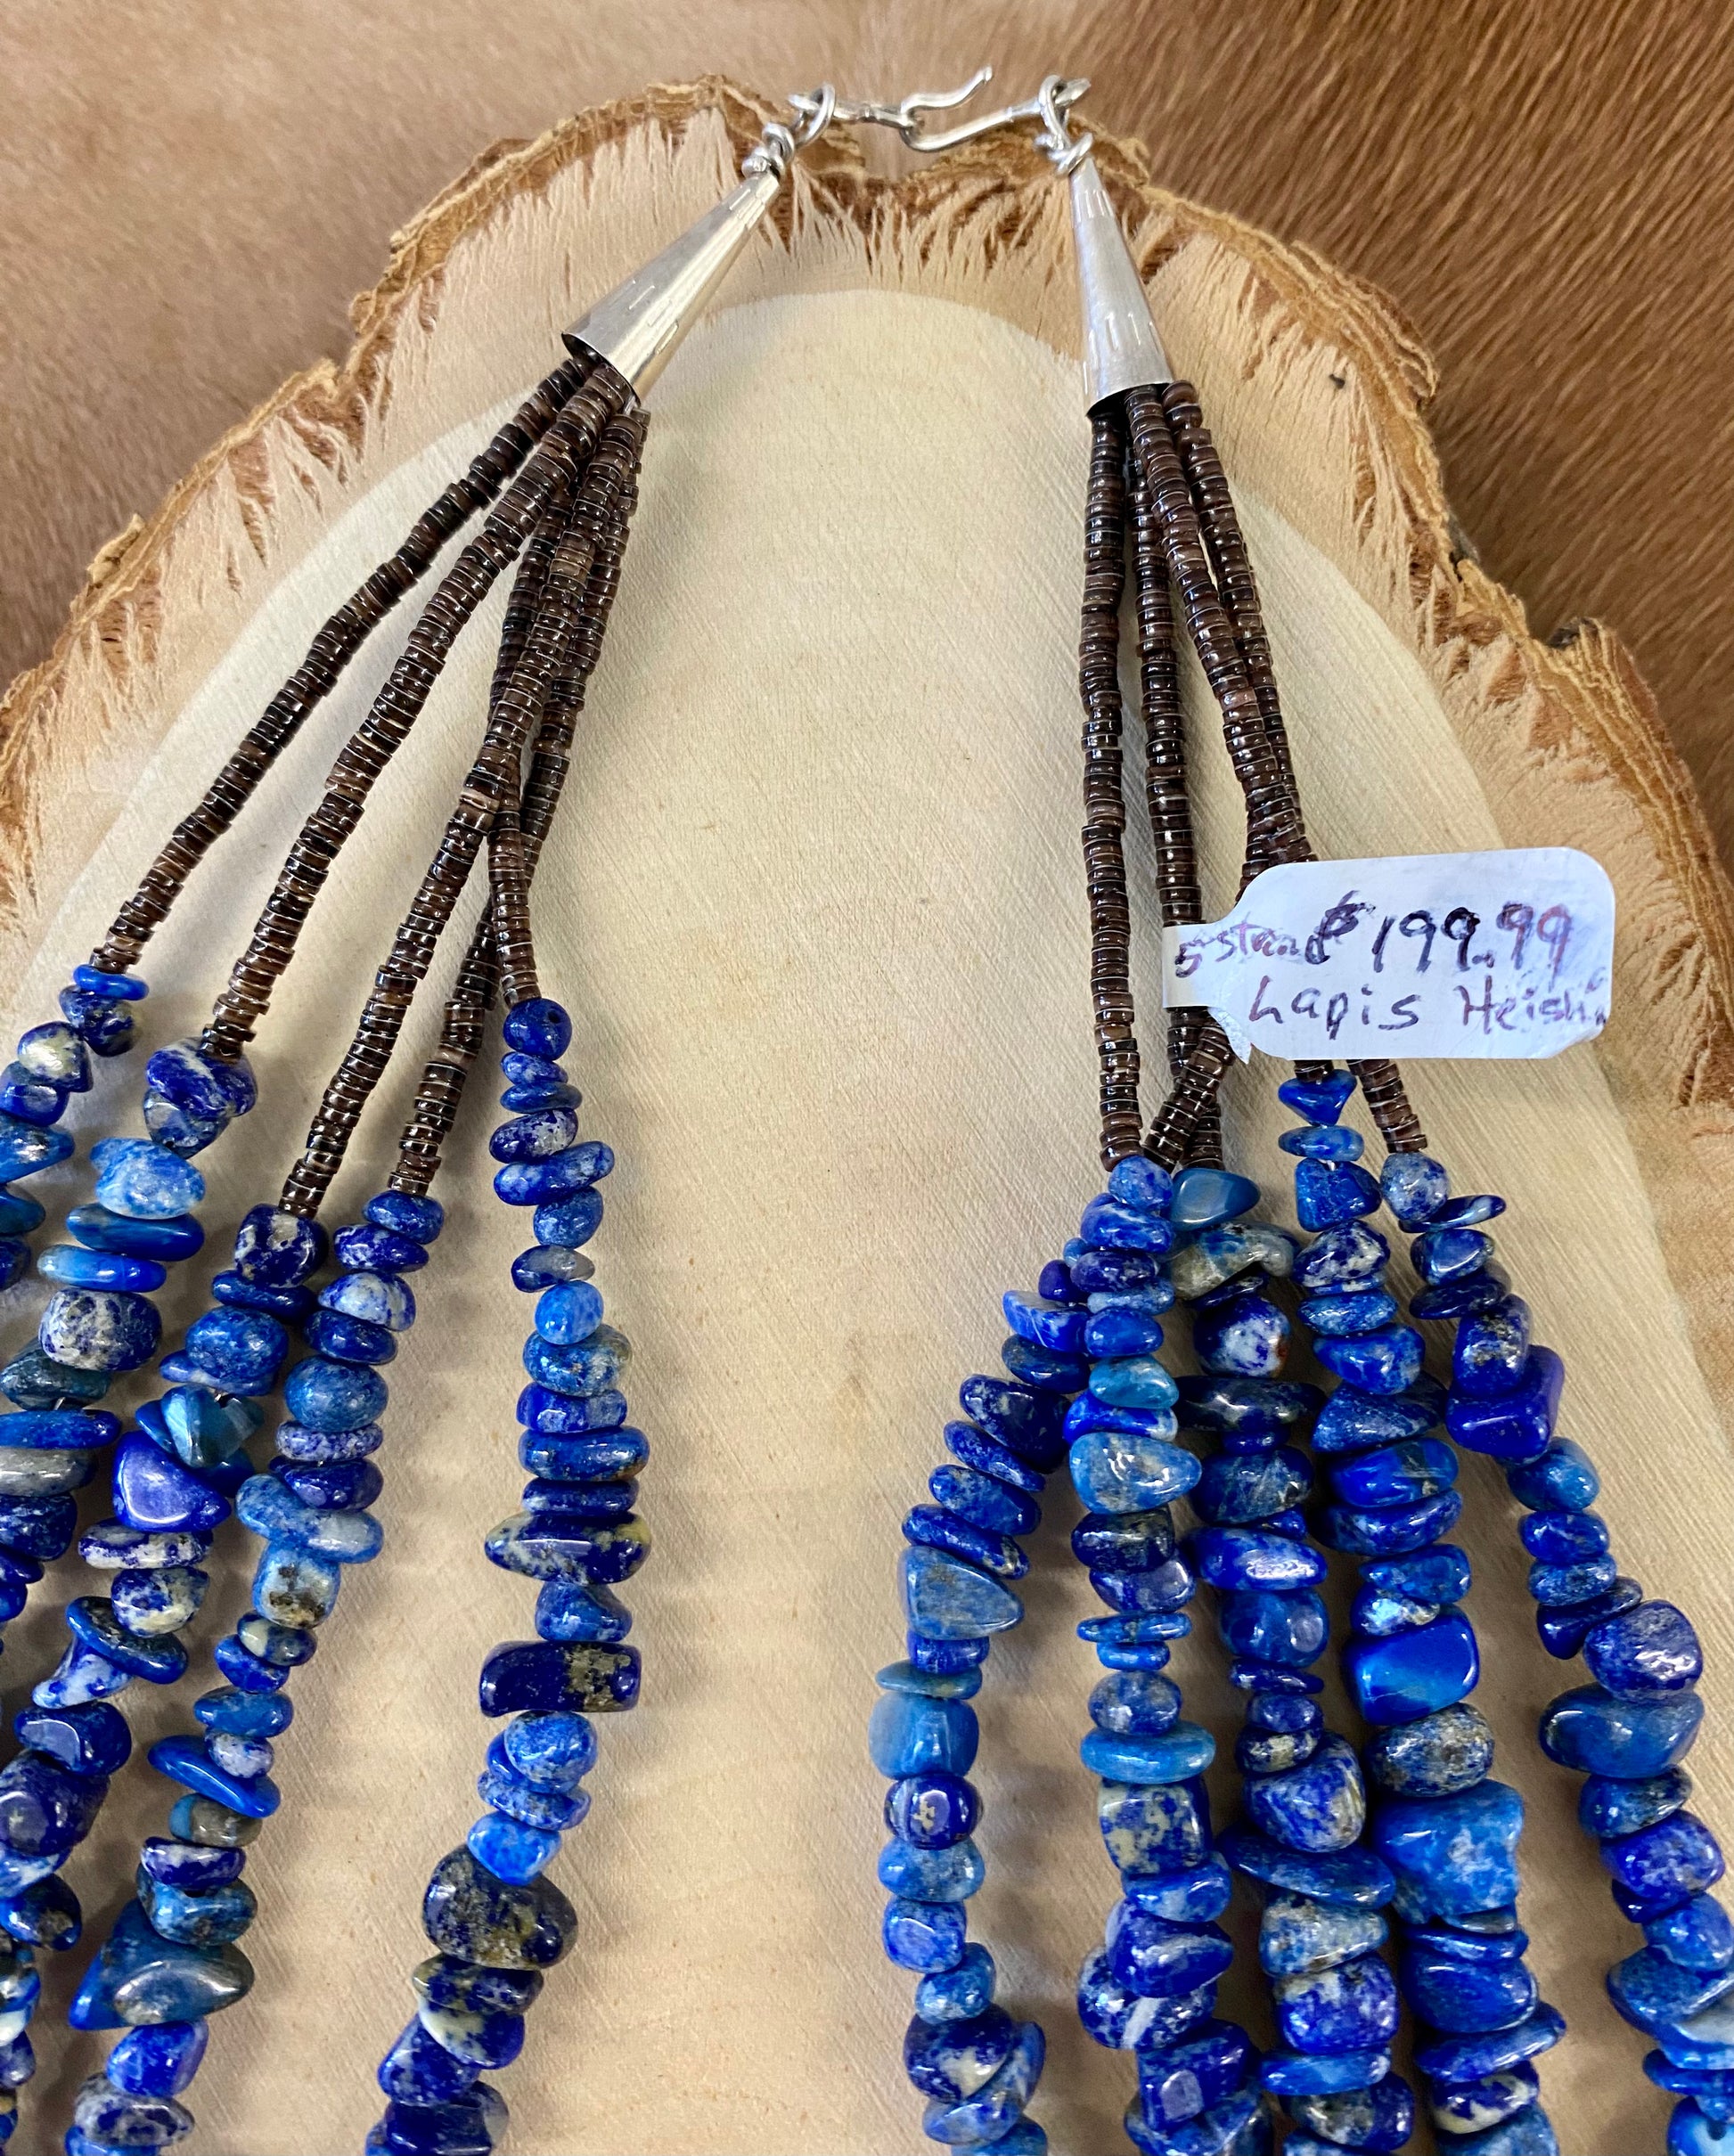 Absolutely stunning sterling silver clasp five strand hand strung blue Lapis and heishe 27” inch length necklace. The shades of blue in this piece are out of this world amazing! This necklace will make a statement with any outfit.   Size: 27" Inches Length   Stone: Blue Lapis 